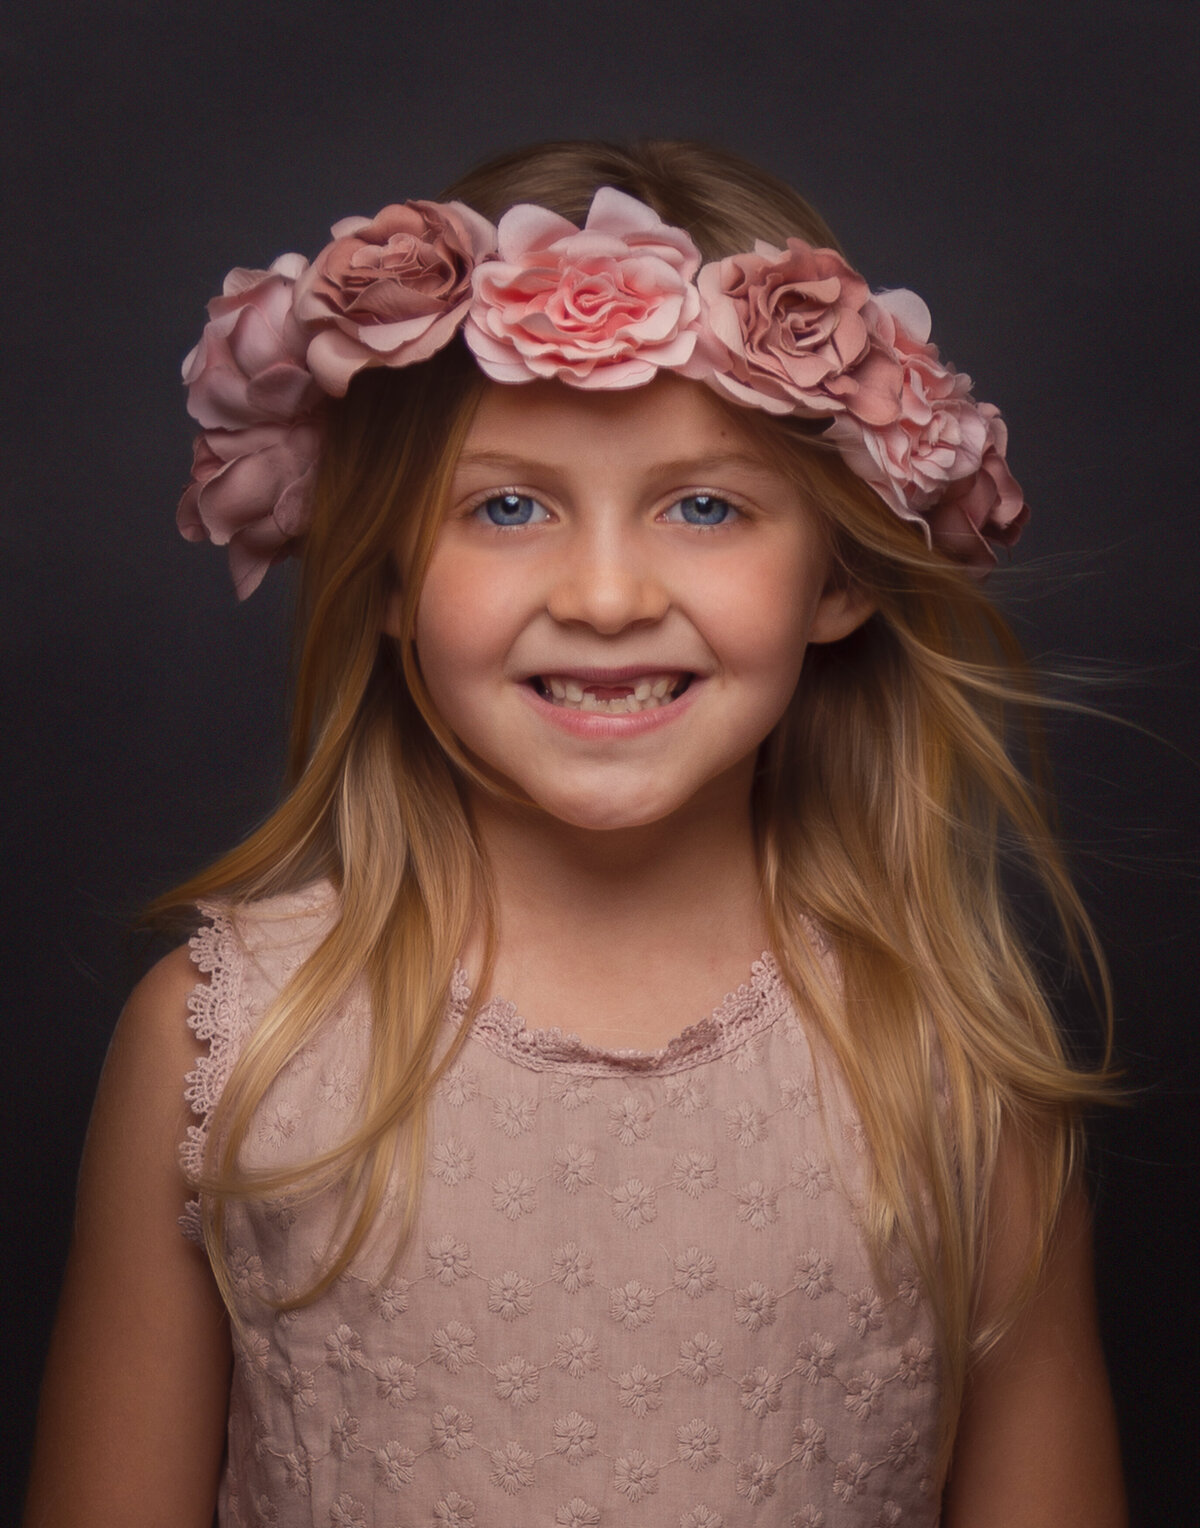 girl child with empty front teeth smiling widely with a crown of pale peach roses